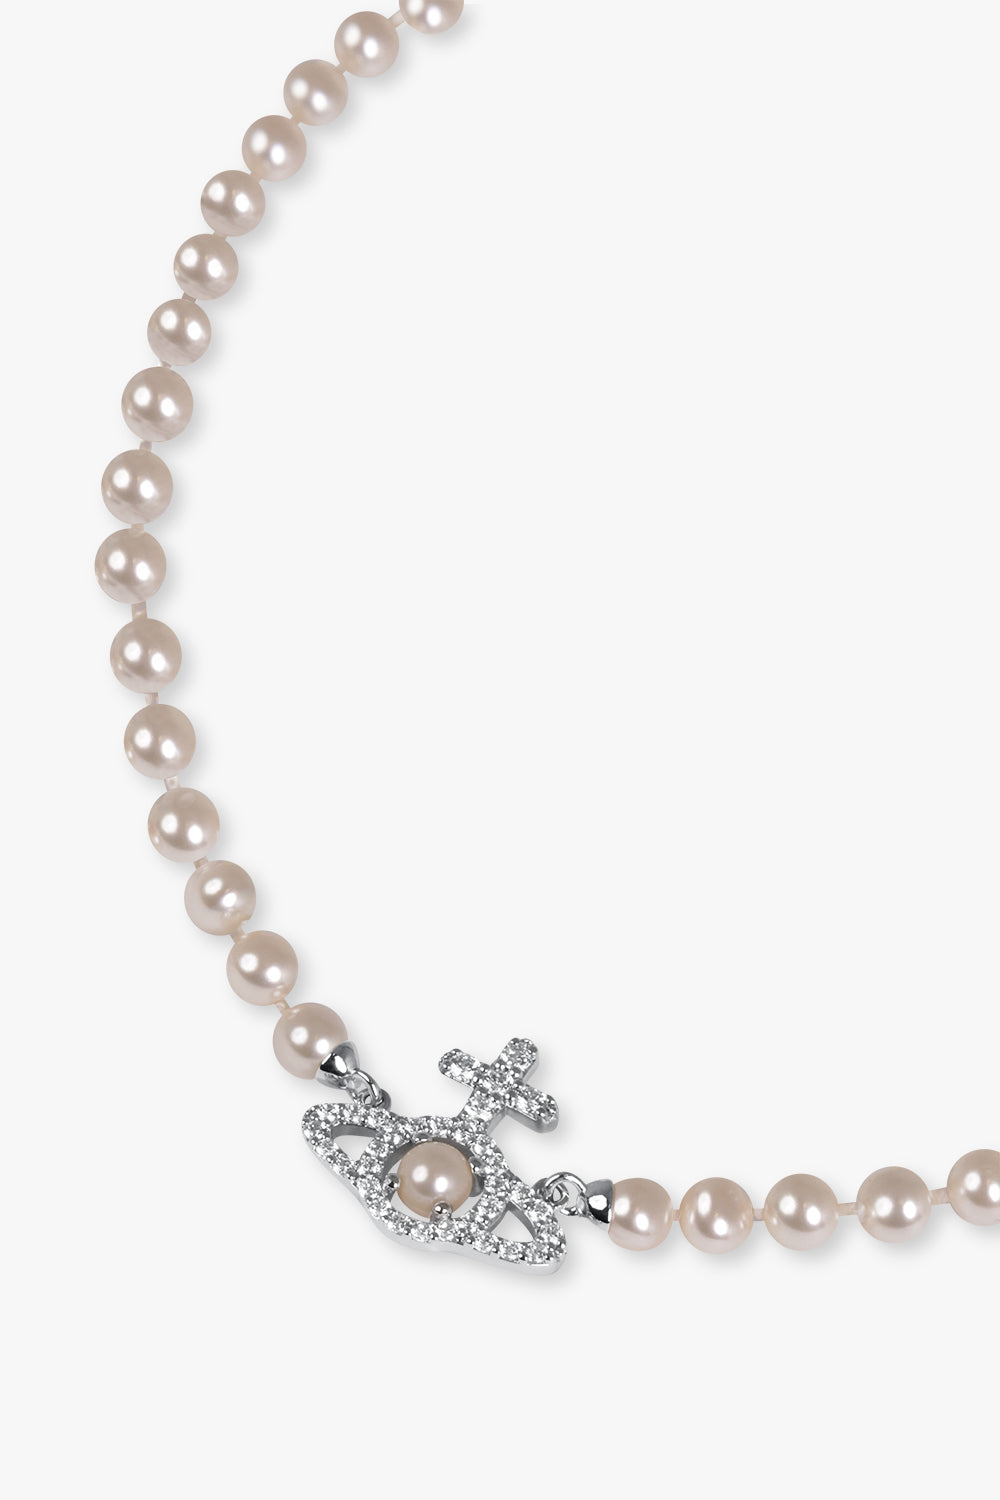 VIVIENNE WESTWOOD JEWELLERY Silver Olympia Pearl Necklace | Silver/Cream Rose Pearl